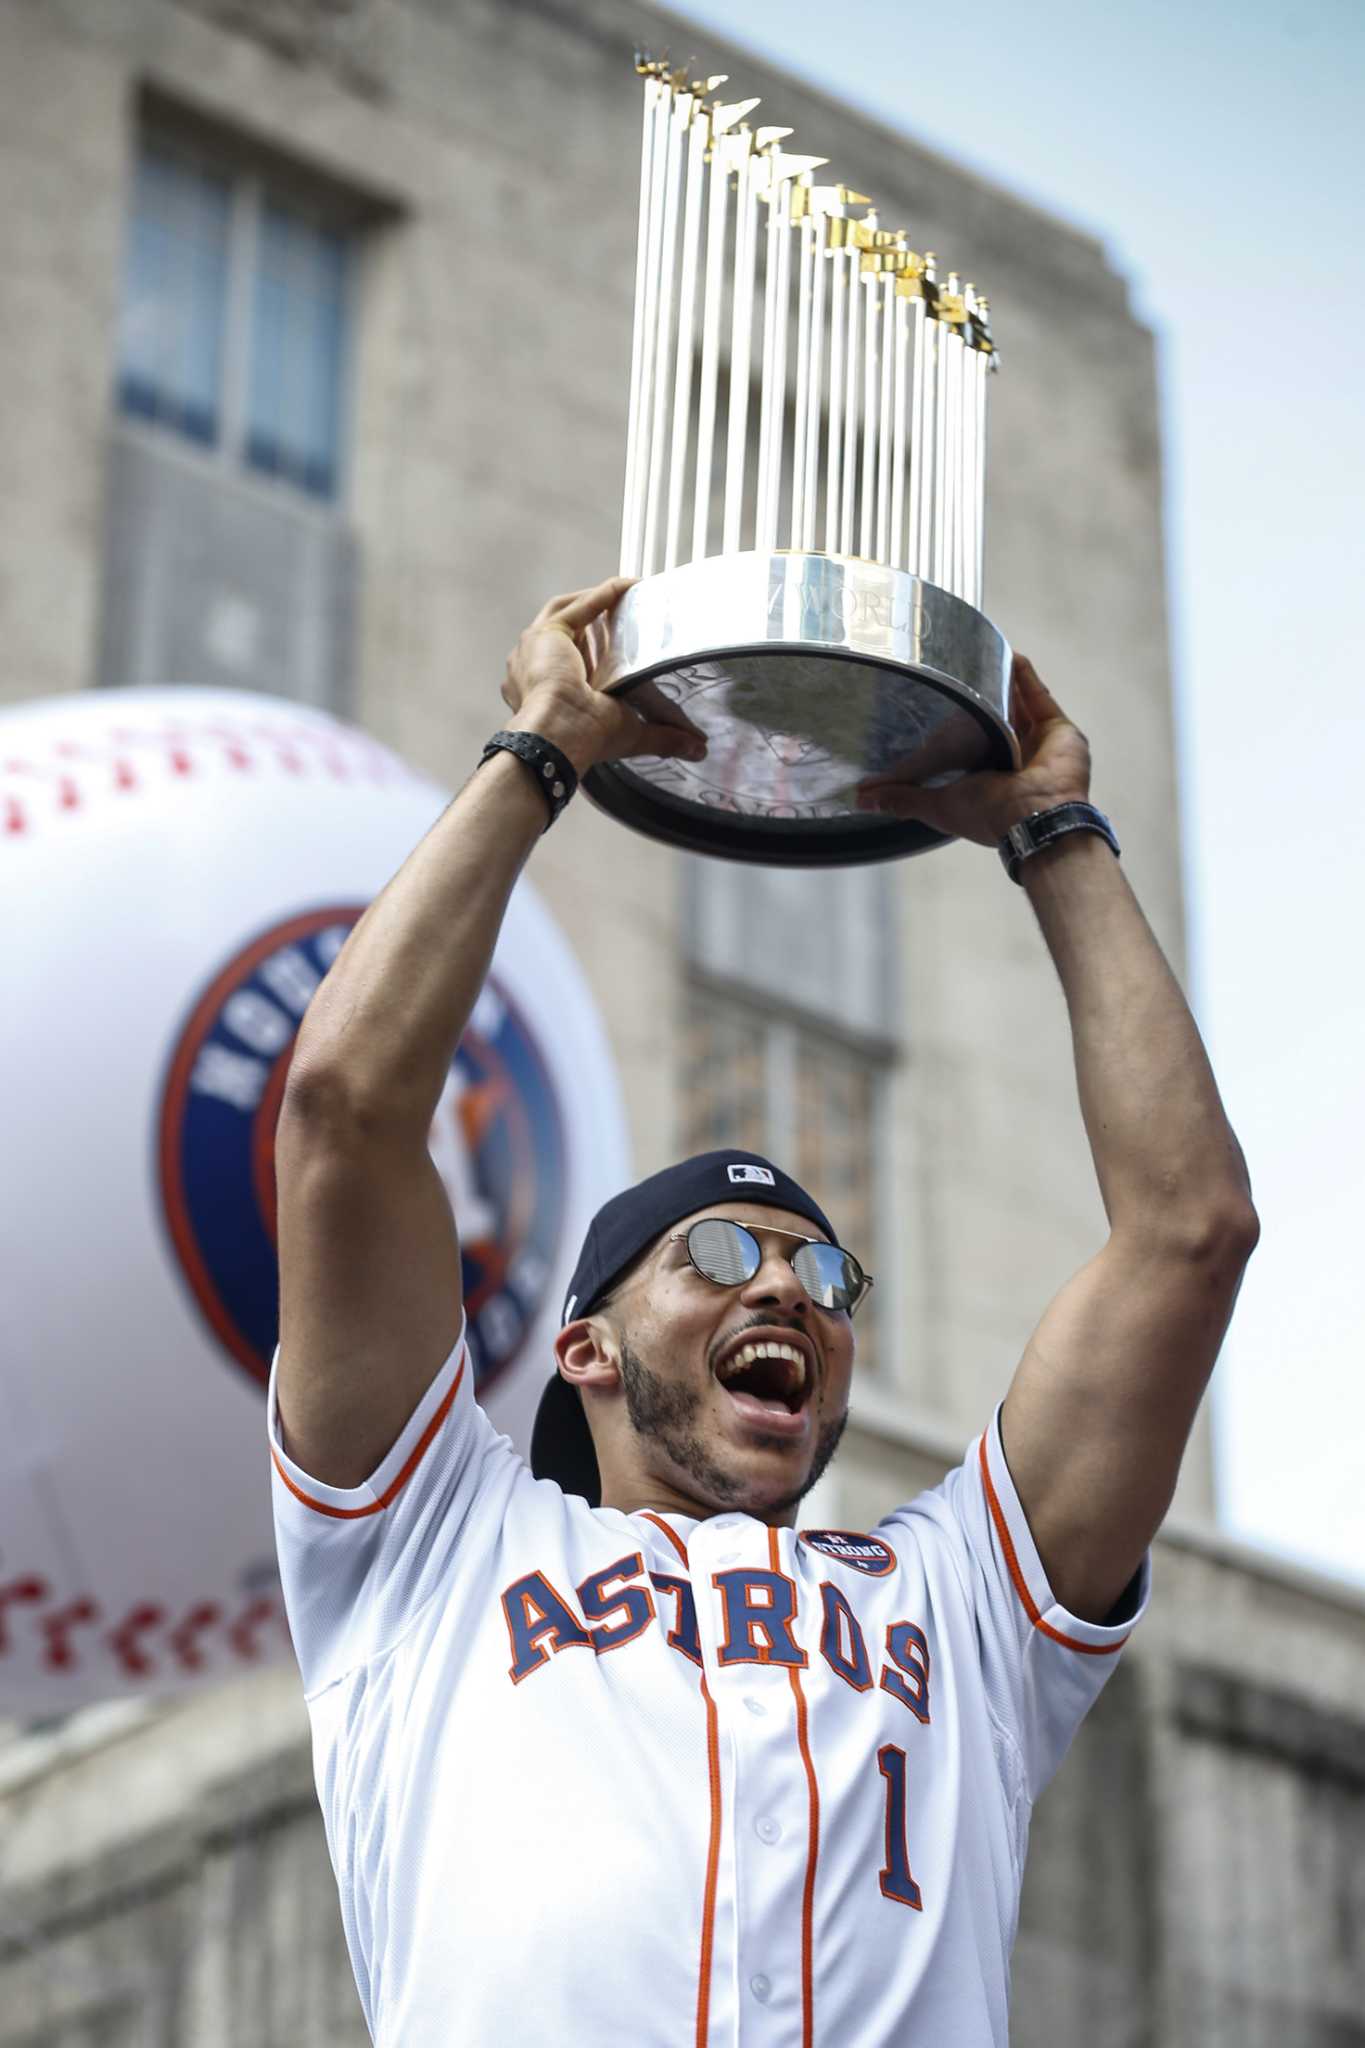 Astros World Series trophy tour dates and locations